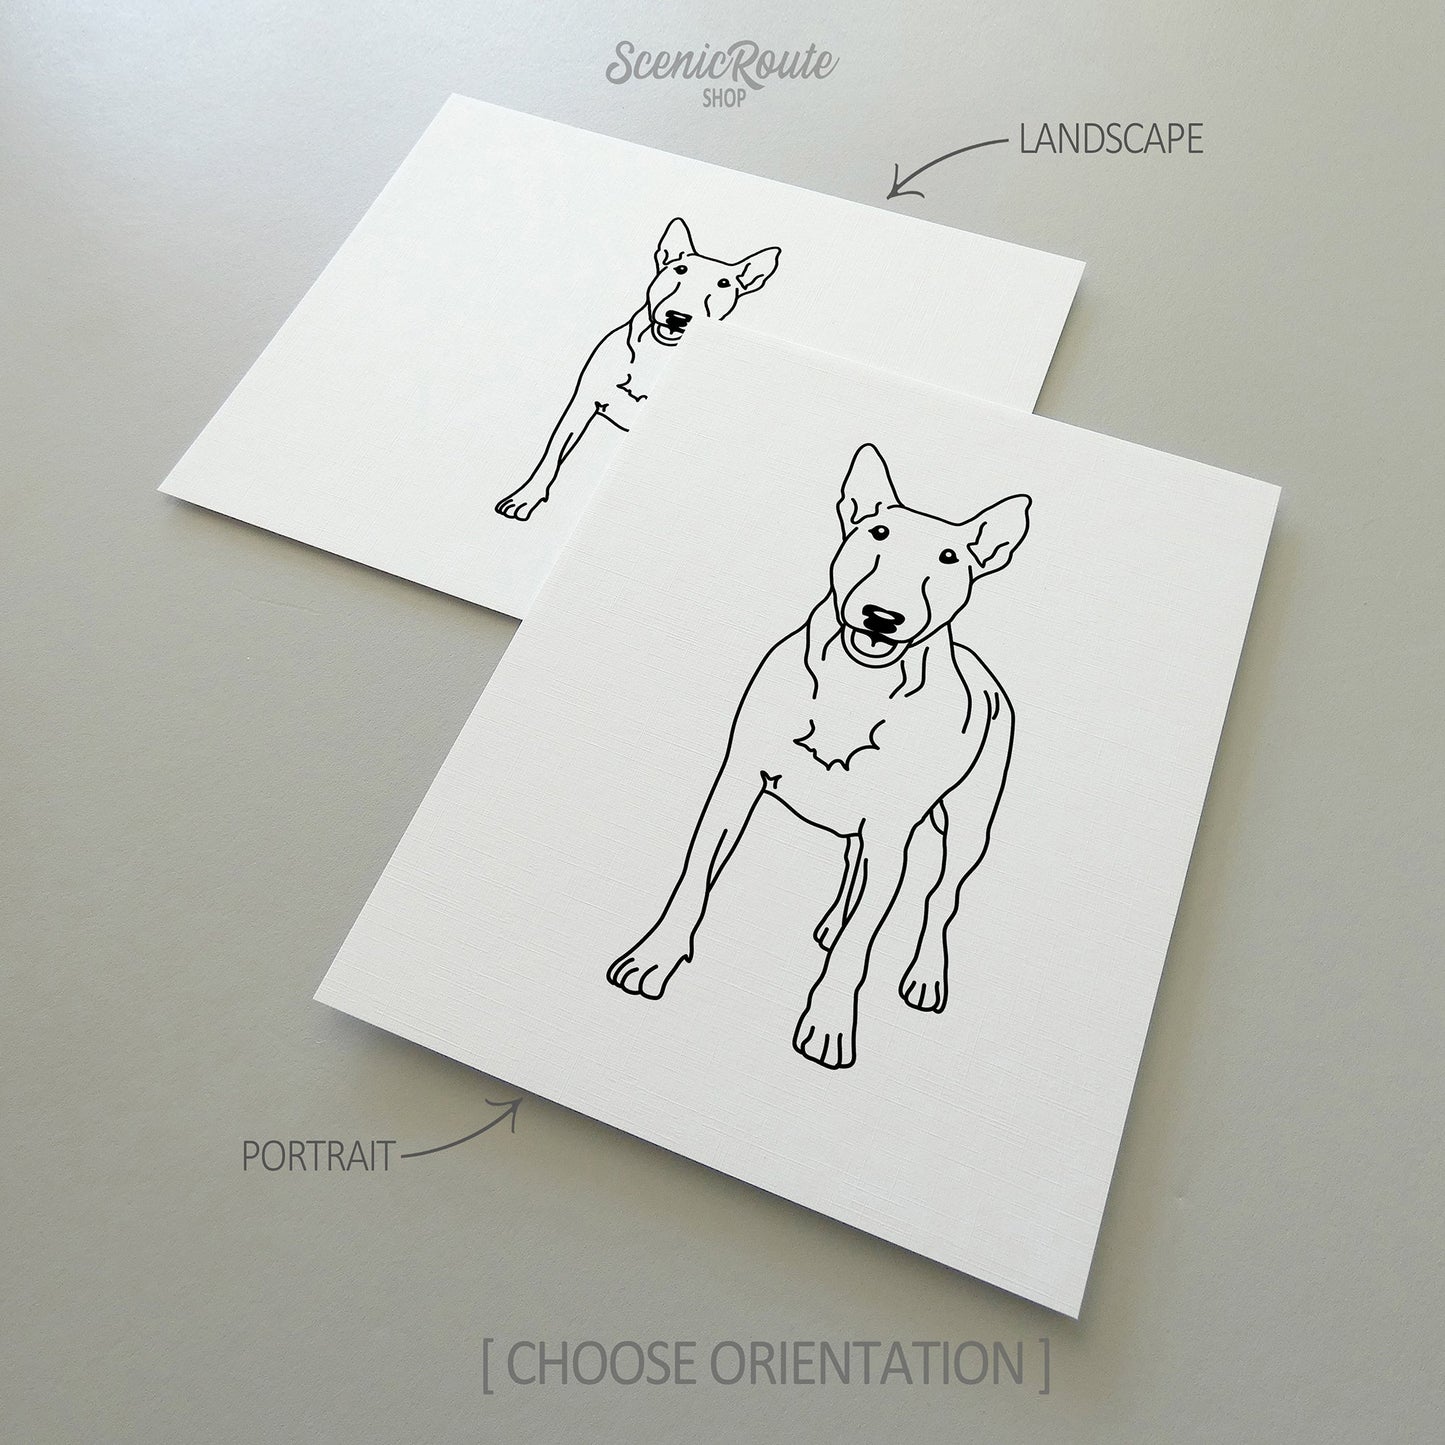 Two drawings of a Bull Terrier dog on white linen paper with a gray background.  Pieces are shown in portrait and landscape orientation options to illustrate the available art print options.